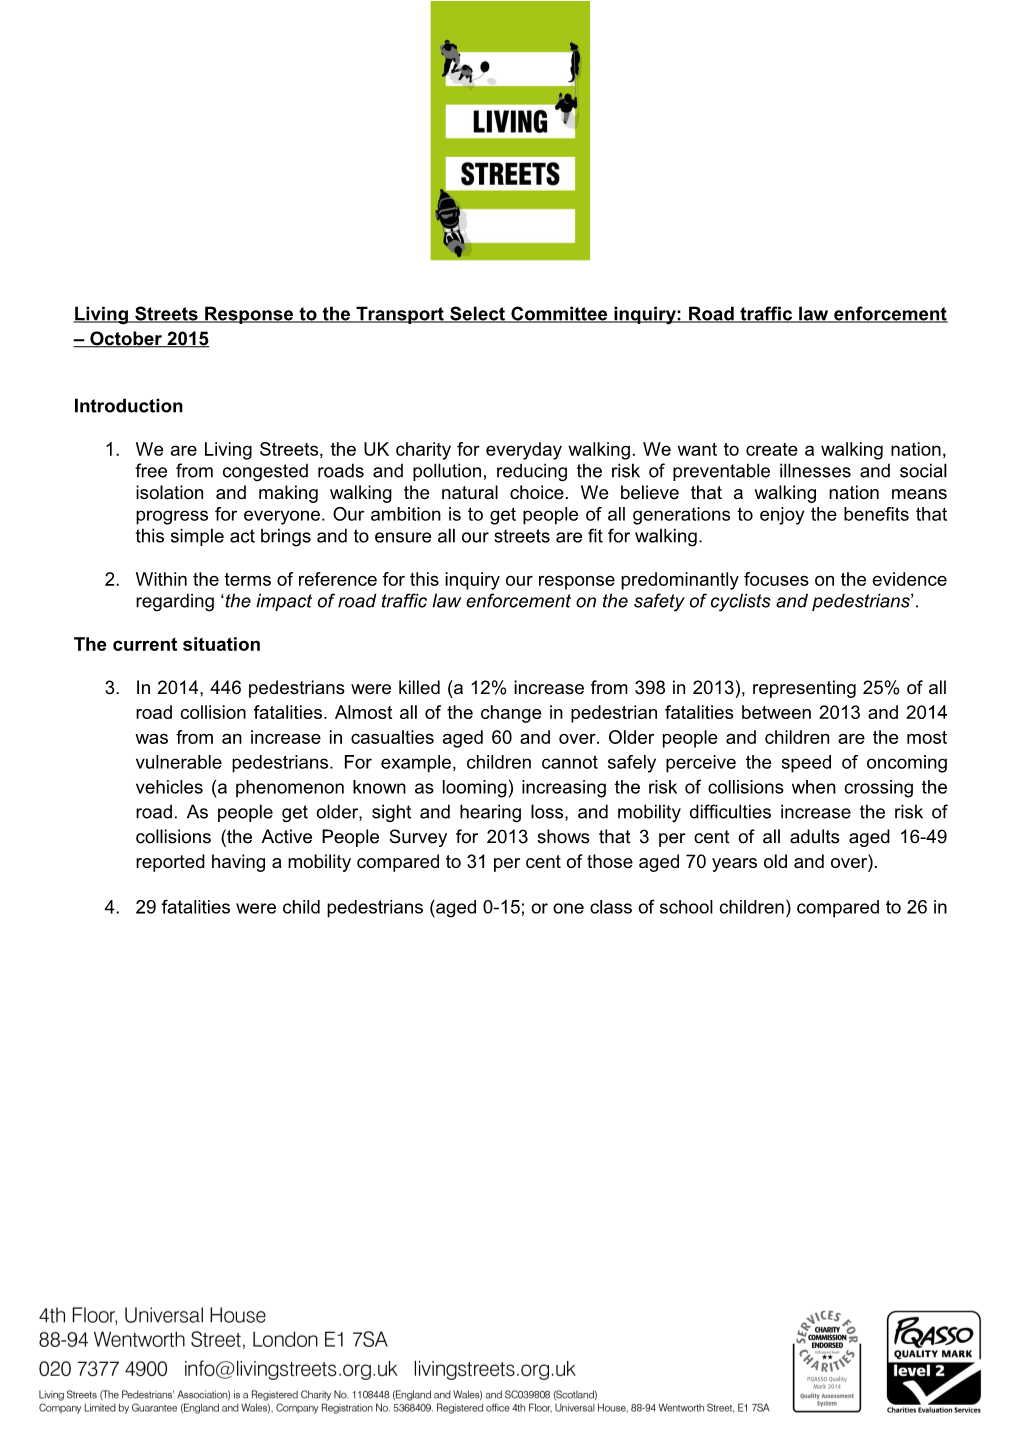 Living Streets Response to the Transport Select Committee Inquiry: Road Traffic Law Enforcement